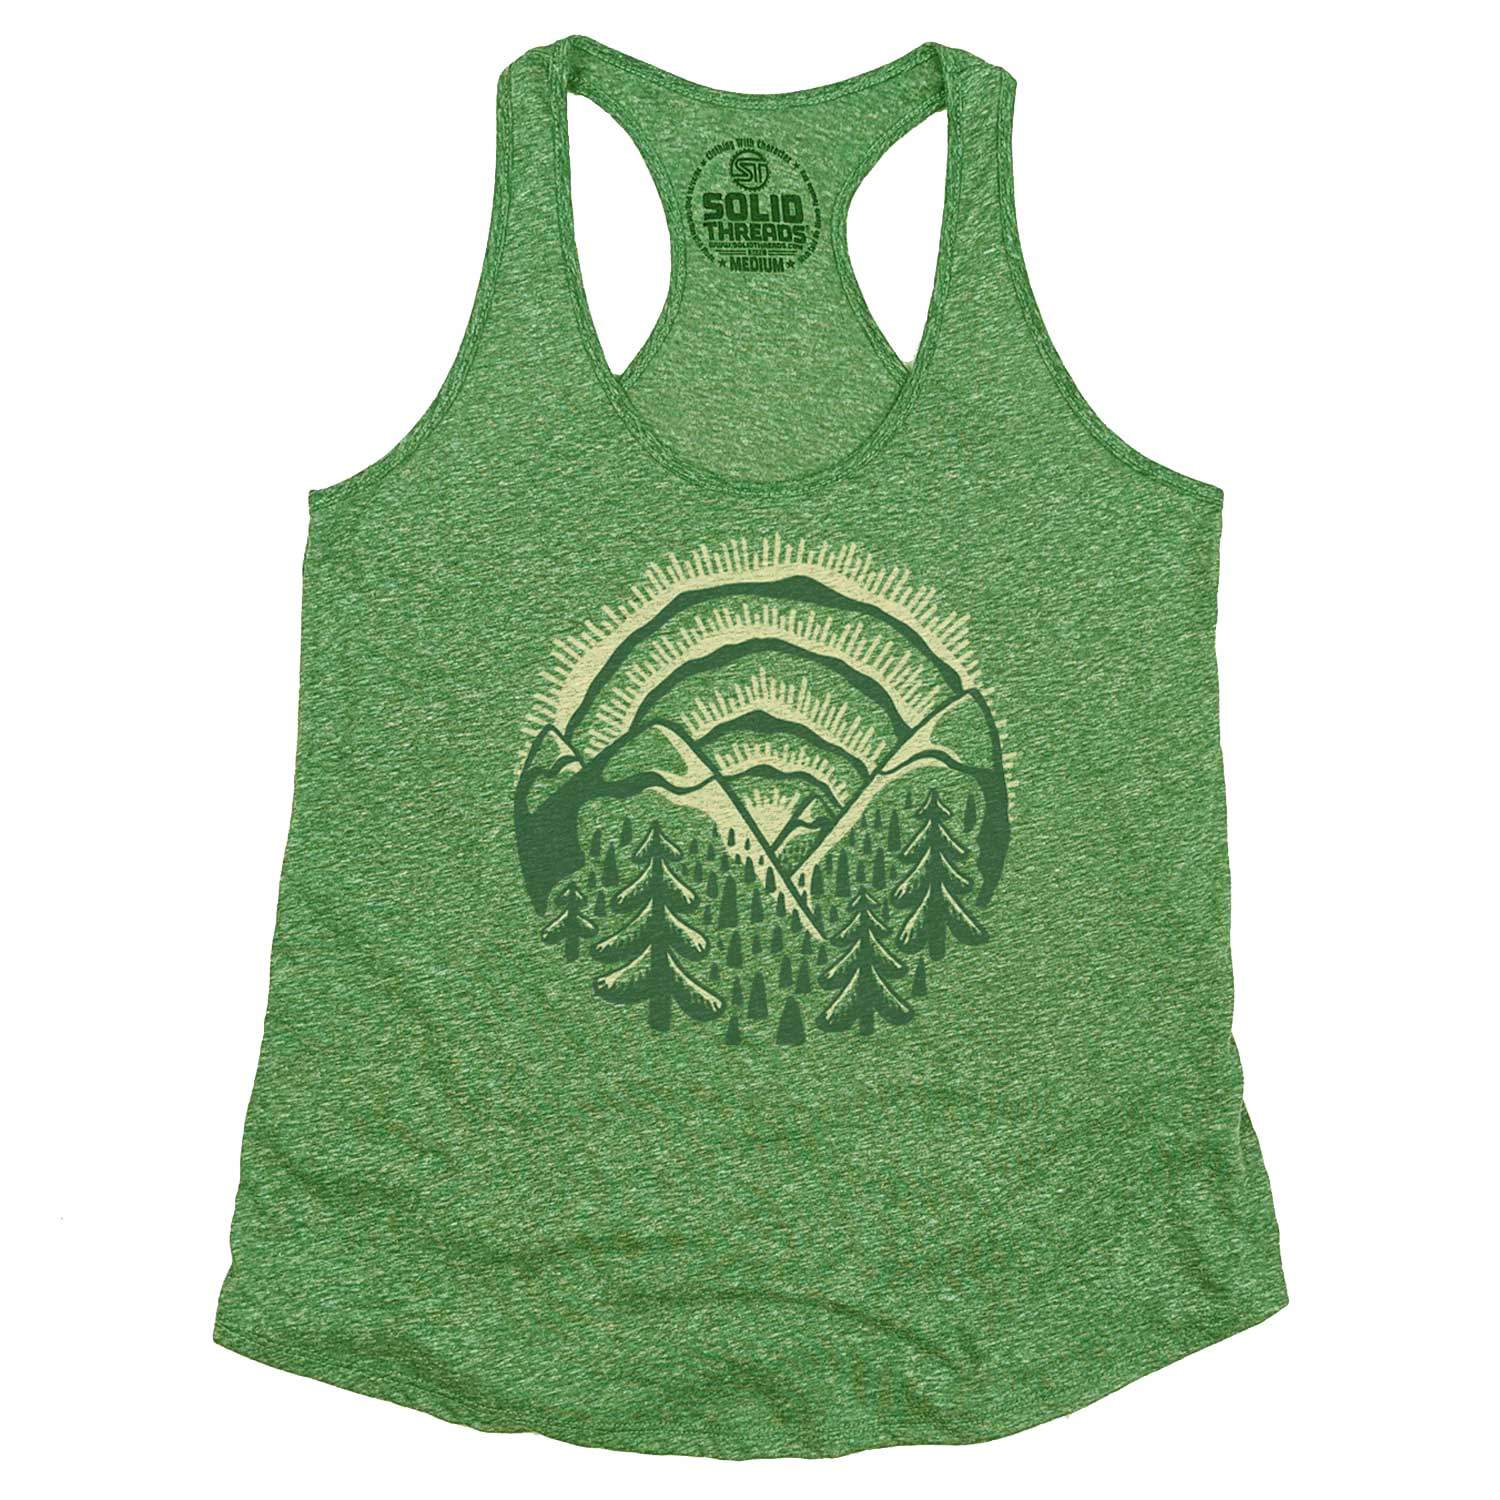 Women's Sunset Tank Top | Design by Dylan Fant